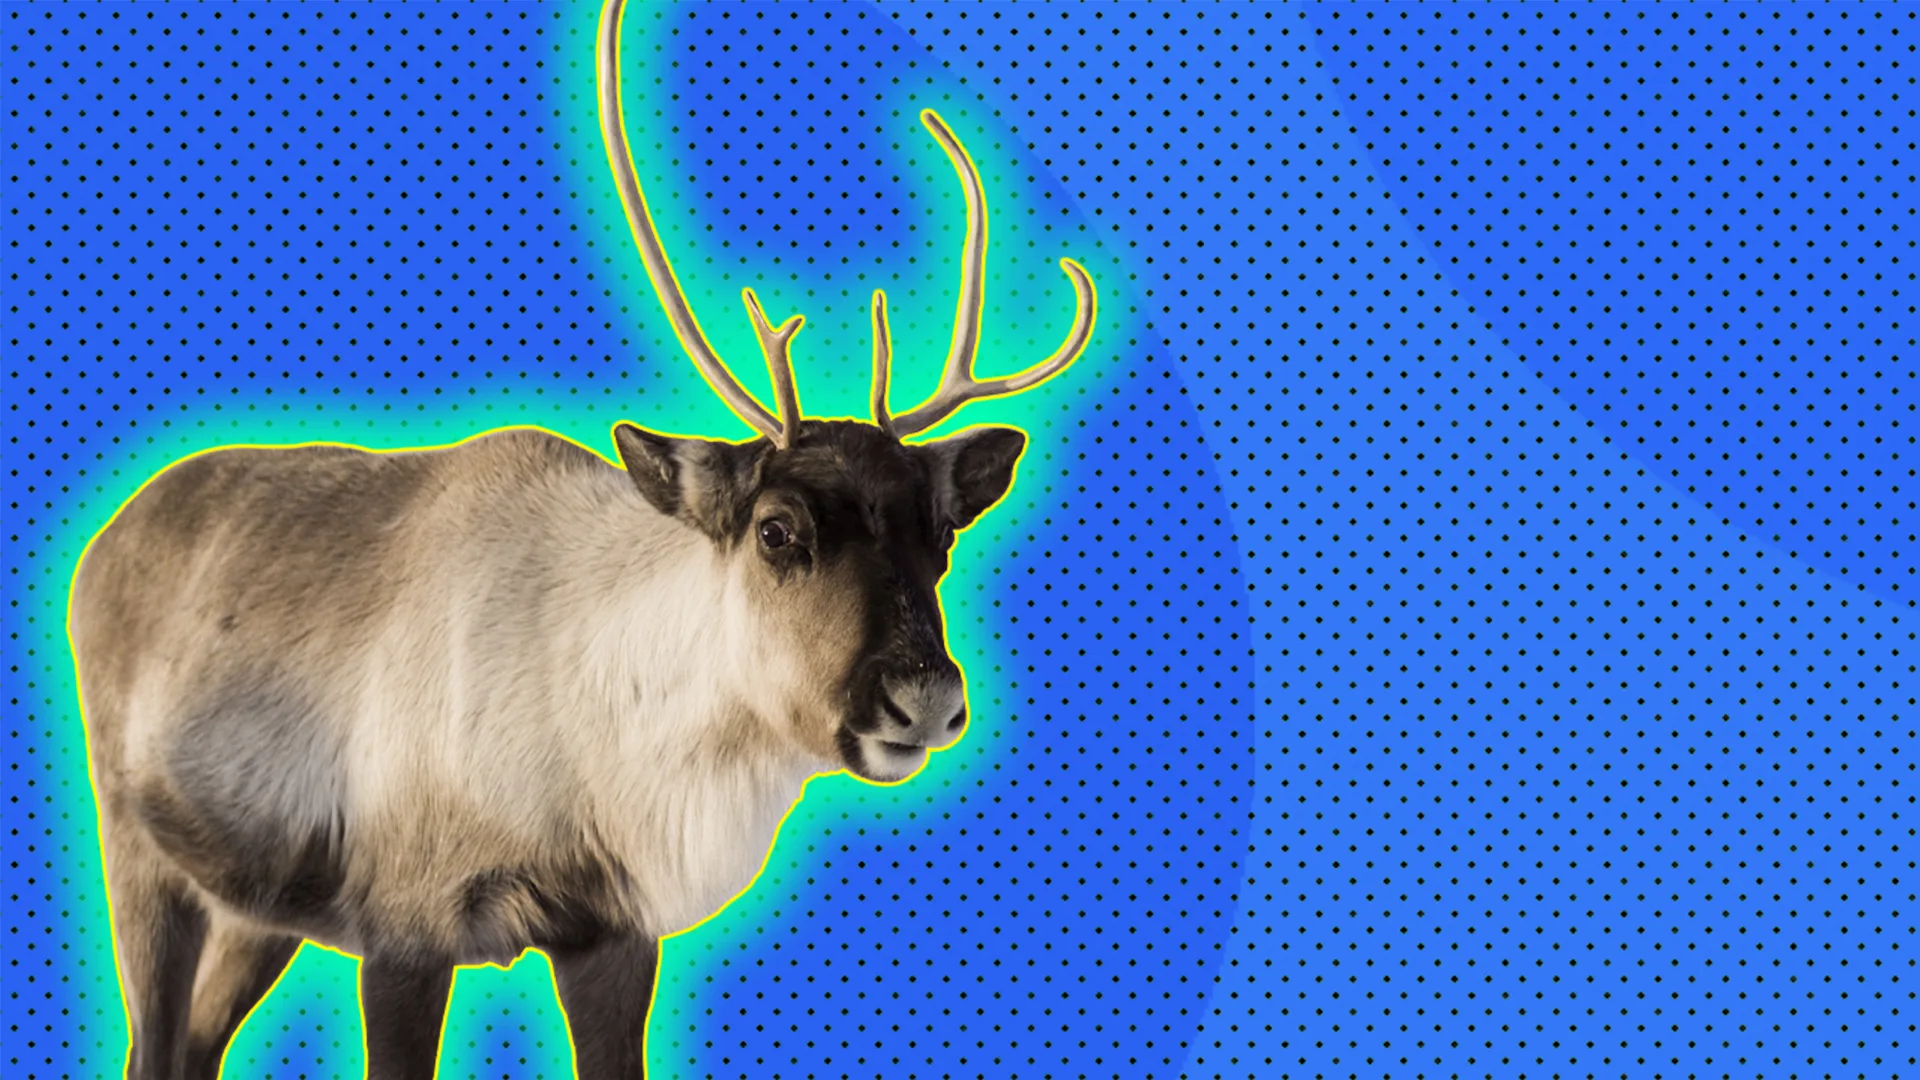 Reindeer, outlined by light green halo effect on blue-dotted background.